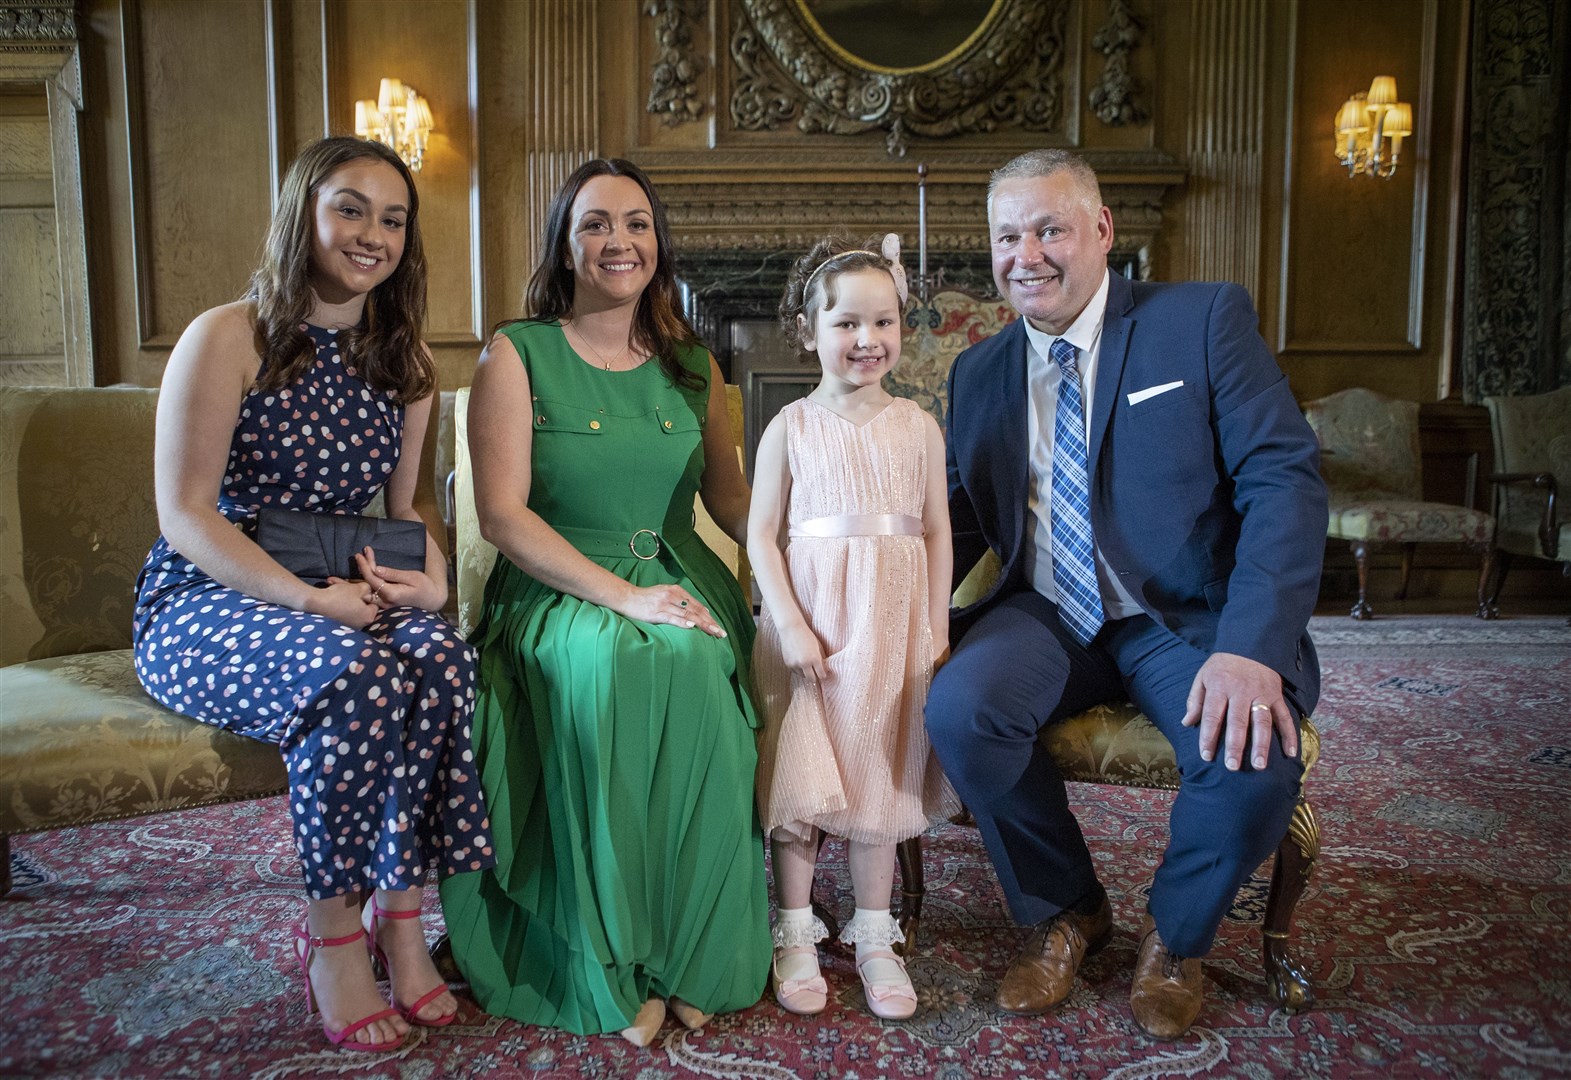 The Princess of Wales invited Mila Sneddon (second right) and her sister Jodi (left), mother Lynda (second left) and father Scott Sneddon to the Palace of Holyroodhouse in 2021 (Jane Barlow/PA)